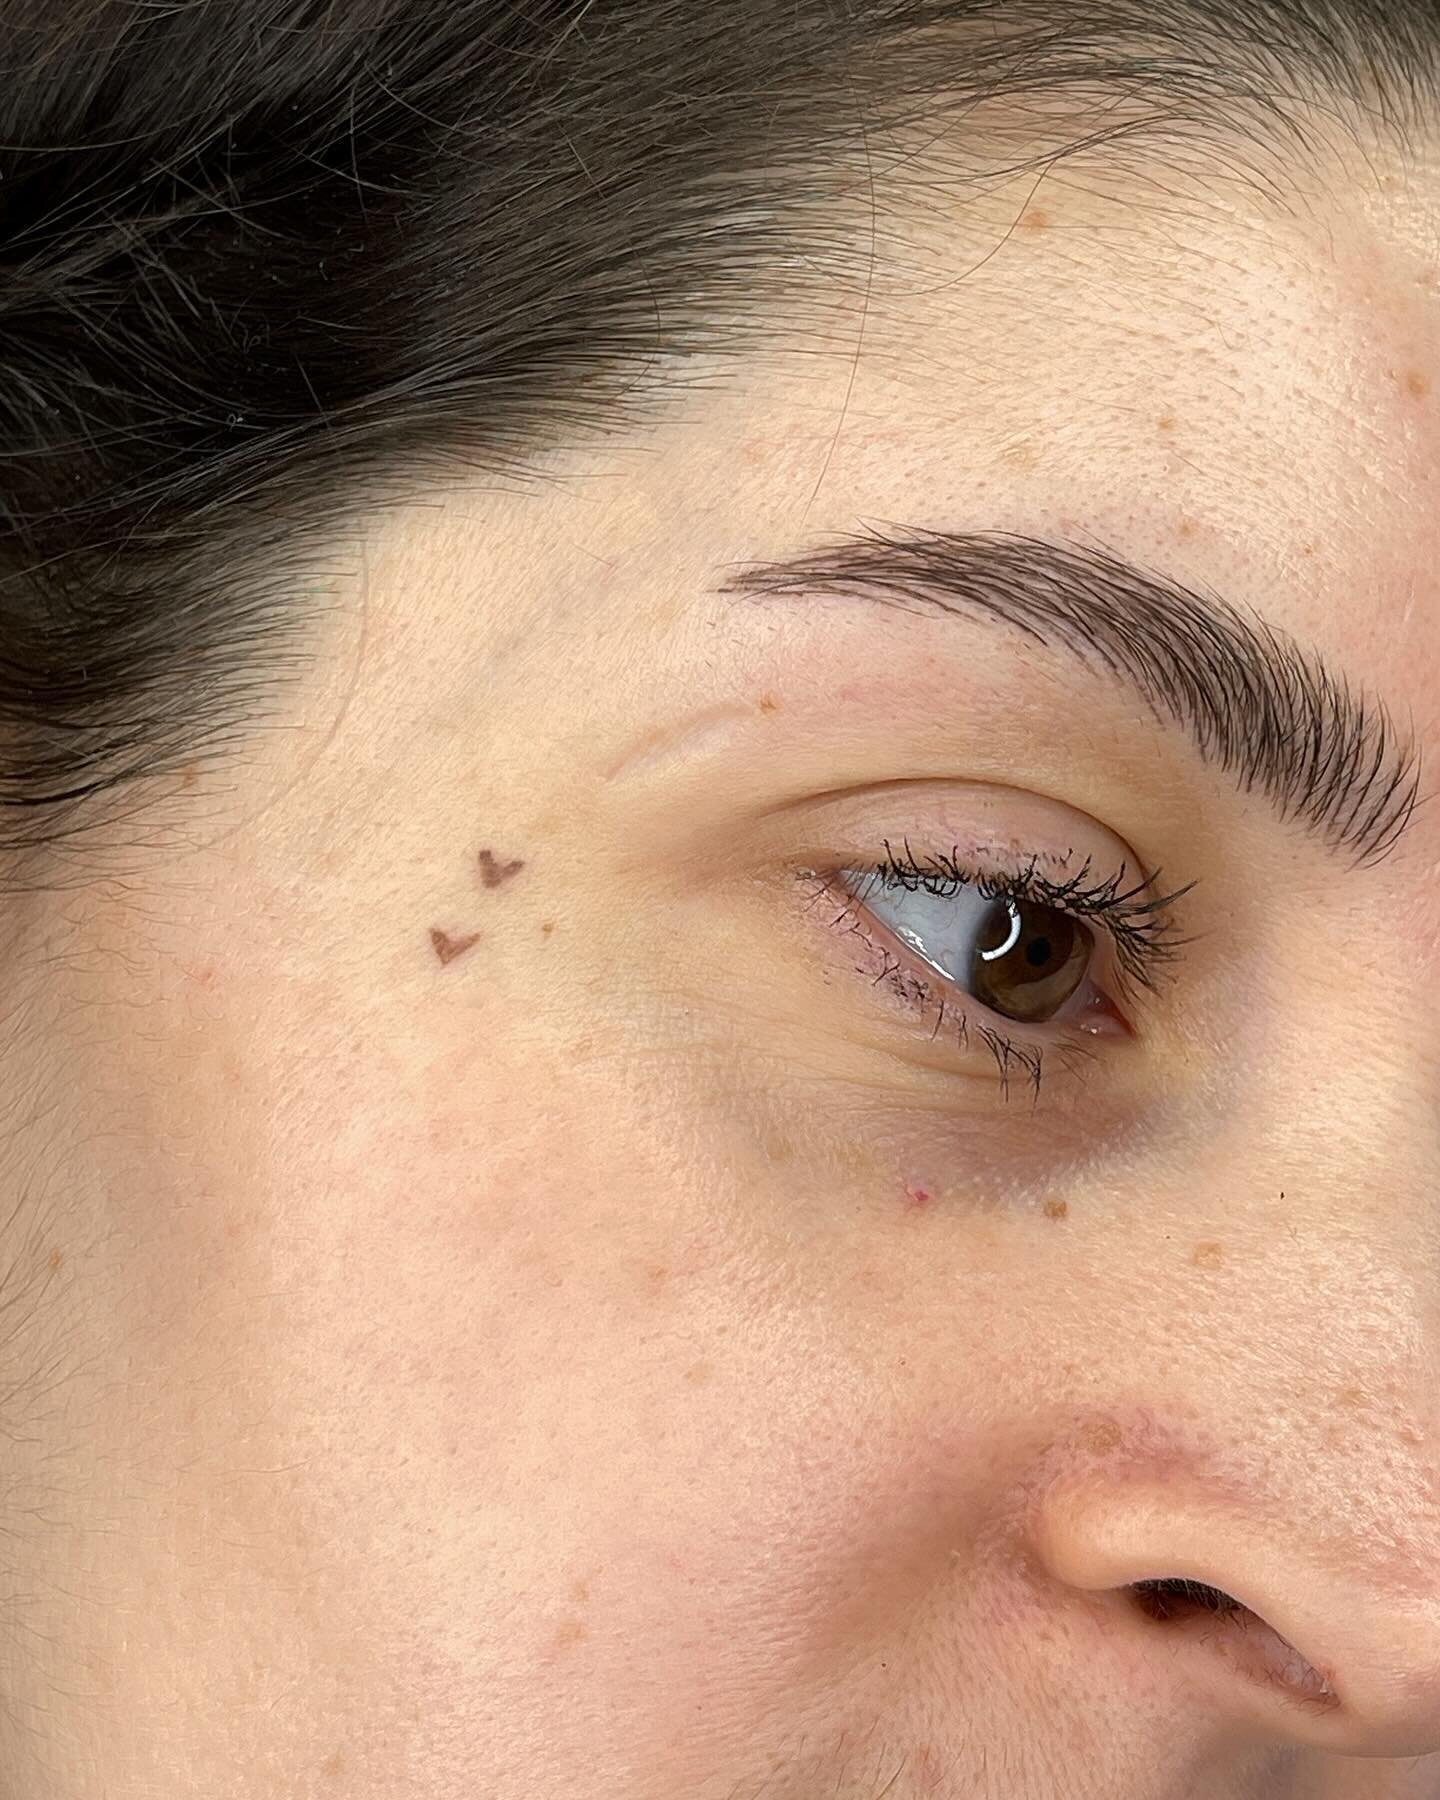 ✦HEALED heart freckles🤎🤎 
In love with these, please come get hearts😍

✨TO BOOK GO TO LINK IN BIO✨

🤍You can always add a freckle session or just a heart to your microblading appointment 
🤍Heart freckles can go anywhere, not just your face 
🤍Al